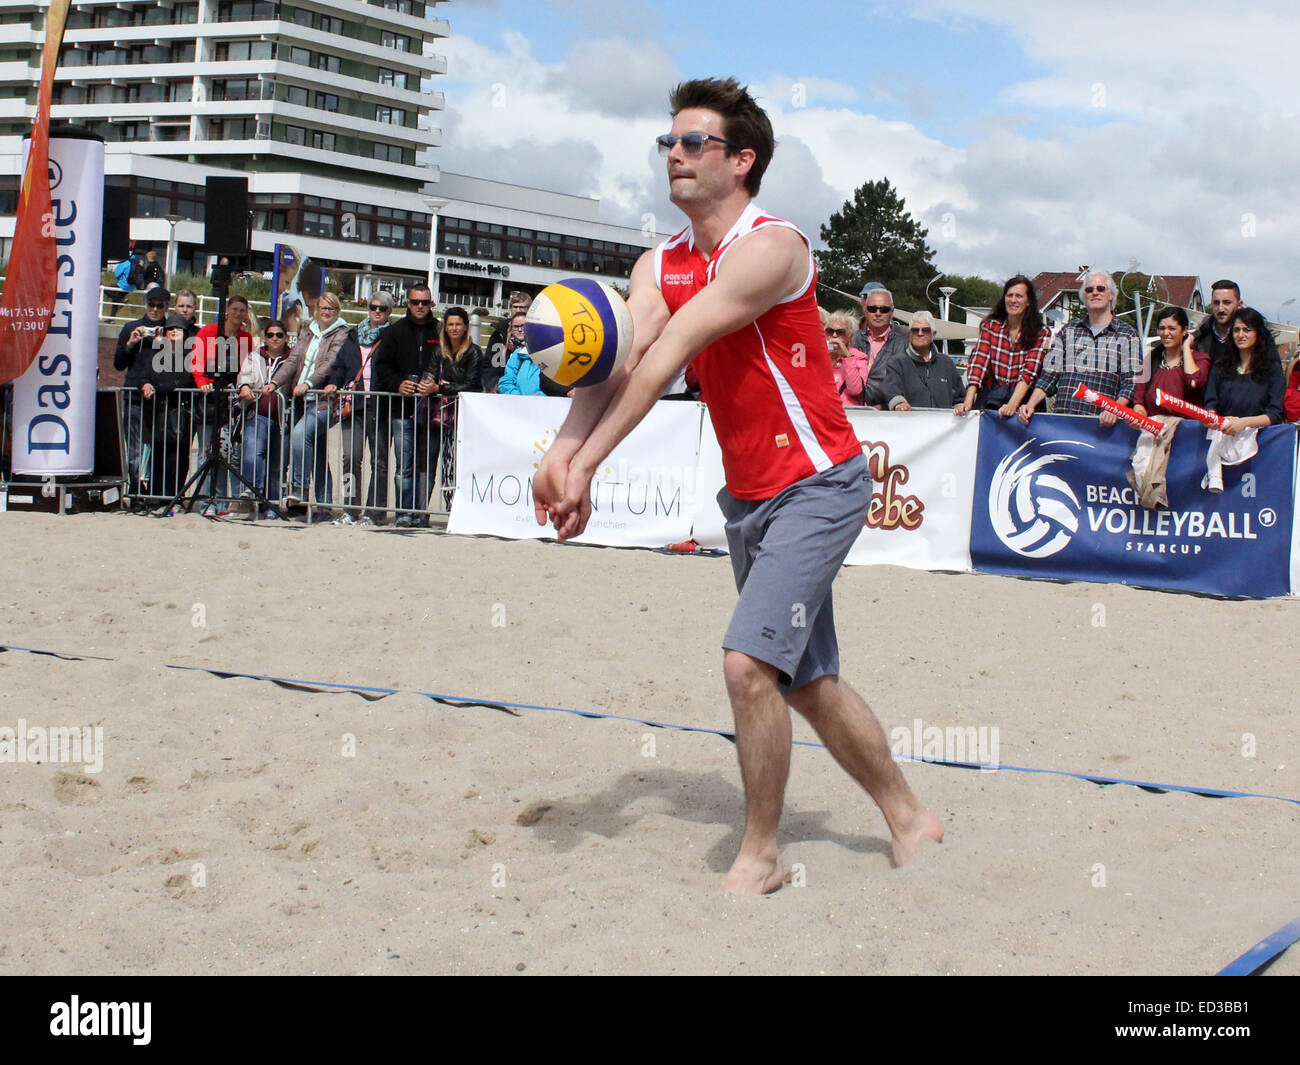 8th annual Beach Volleyball StarCup with celebrities from TV shows Verbotene Liebe, Sturm der Liebe, Rote Rosen and Brisant